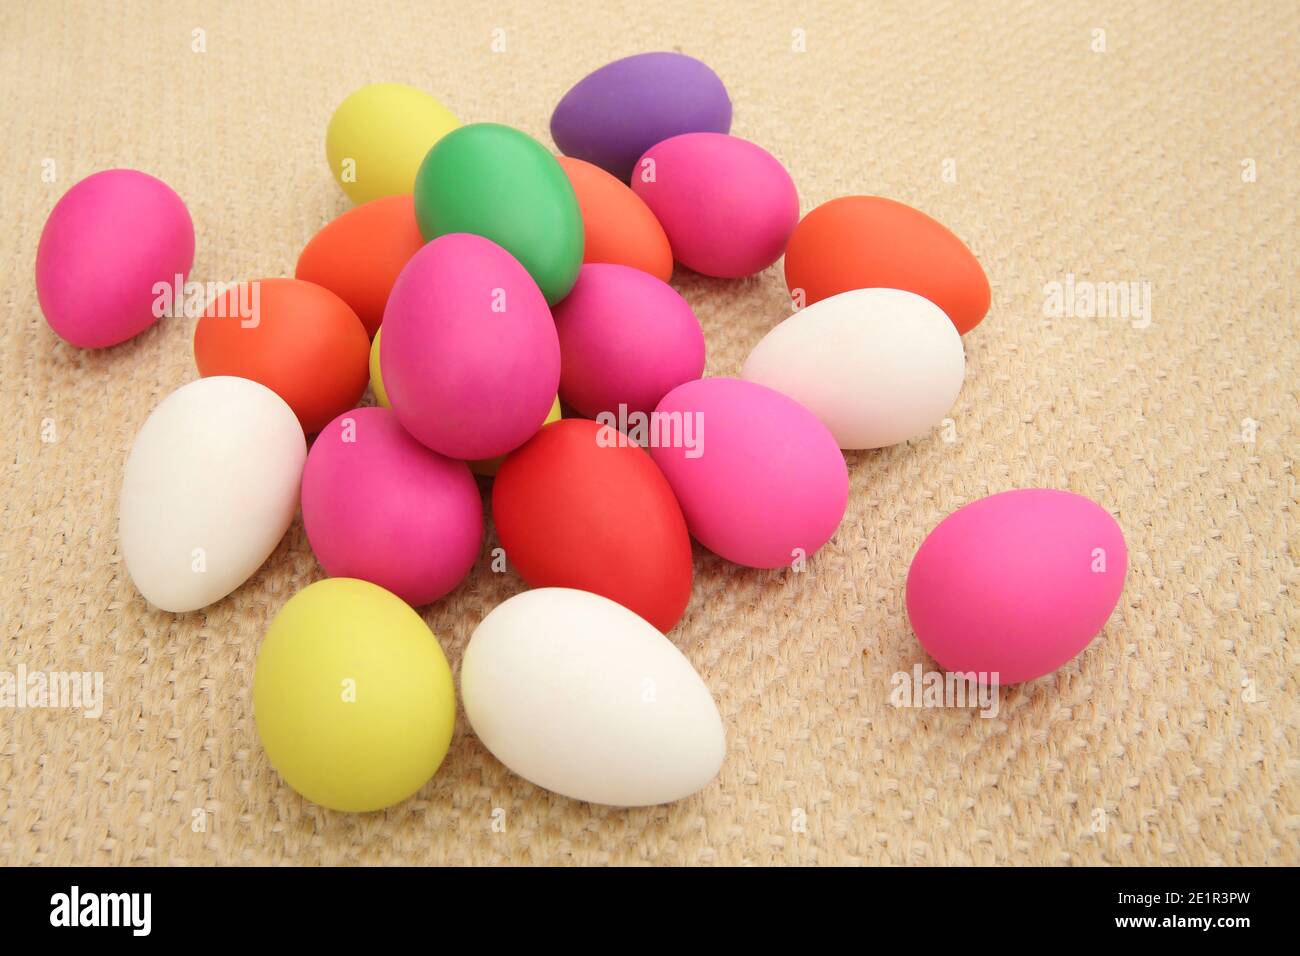 Multi colored easter eggs against a natural beige woven matt background. Stock Photo